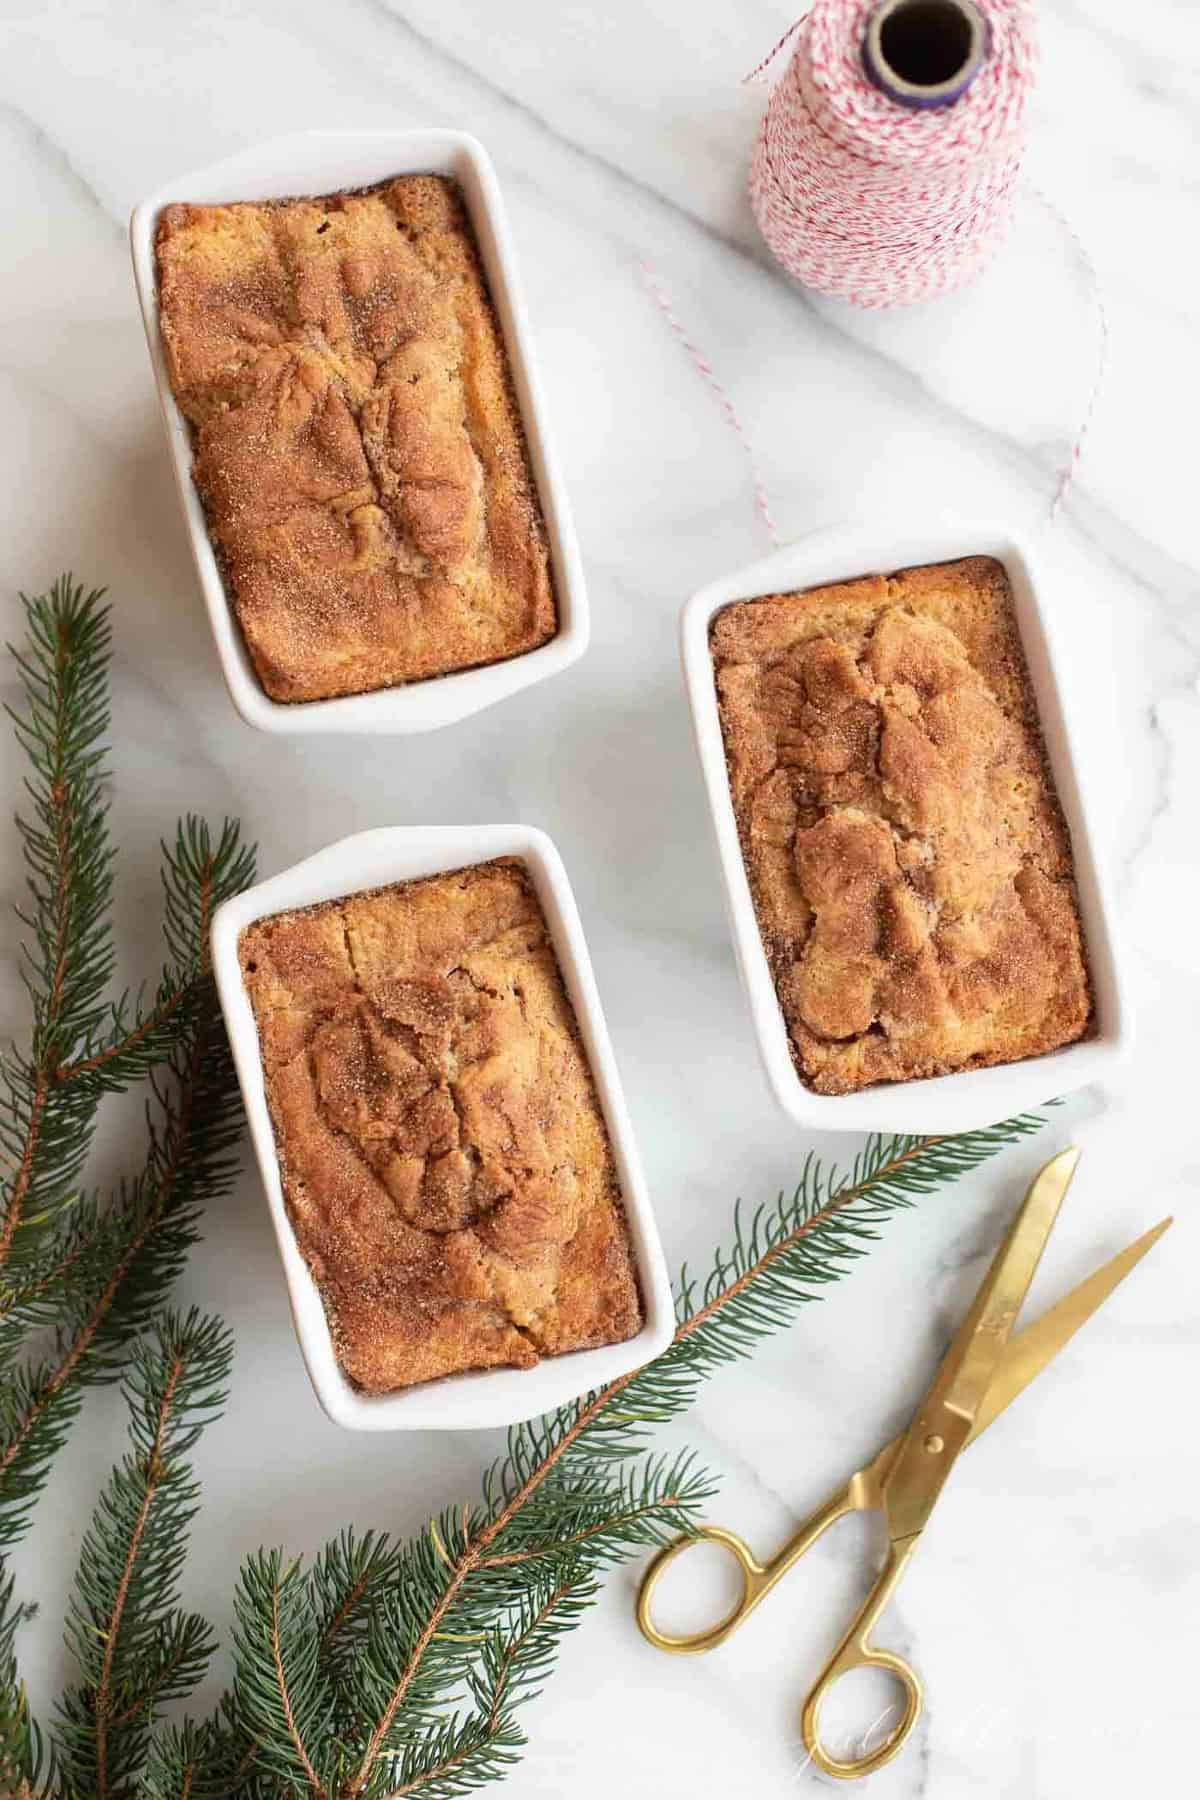 A baking gift idea of 3 loaves of cinnamon bread, evergreen and scissors to the side.